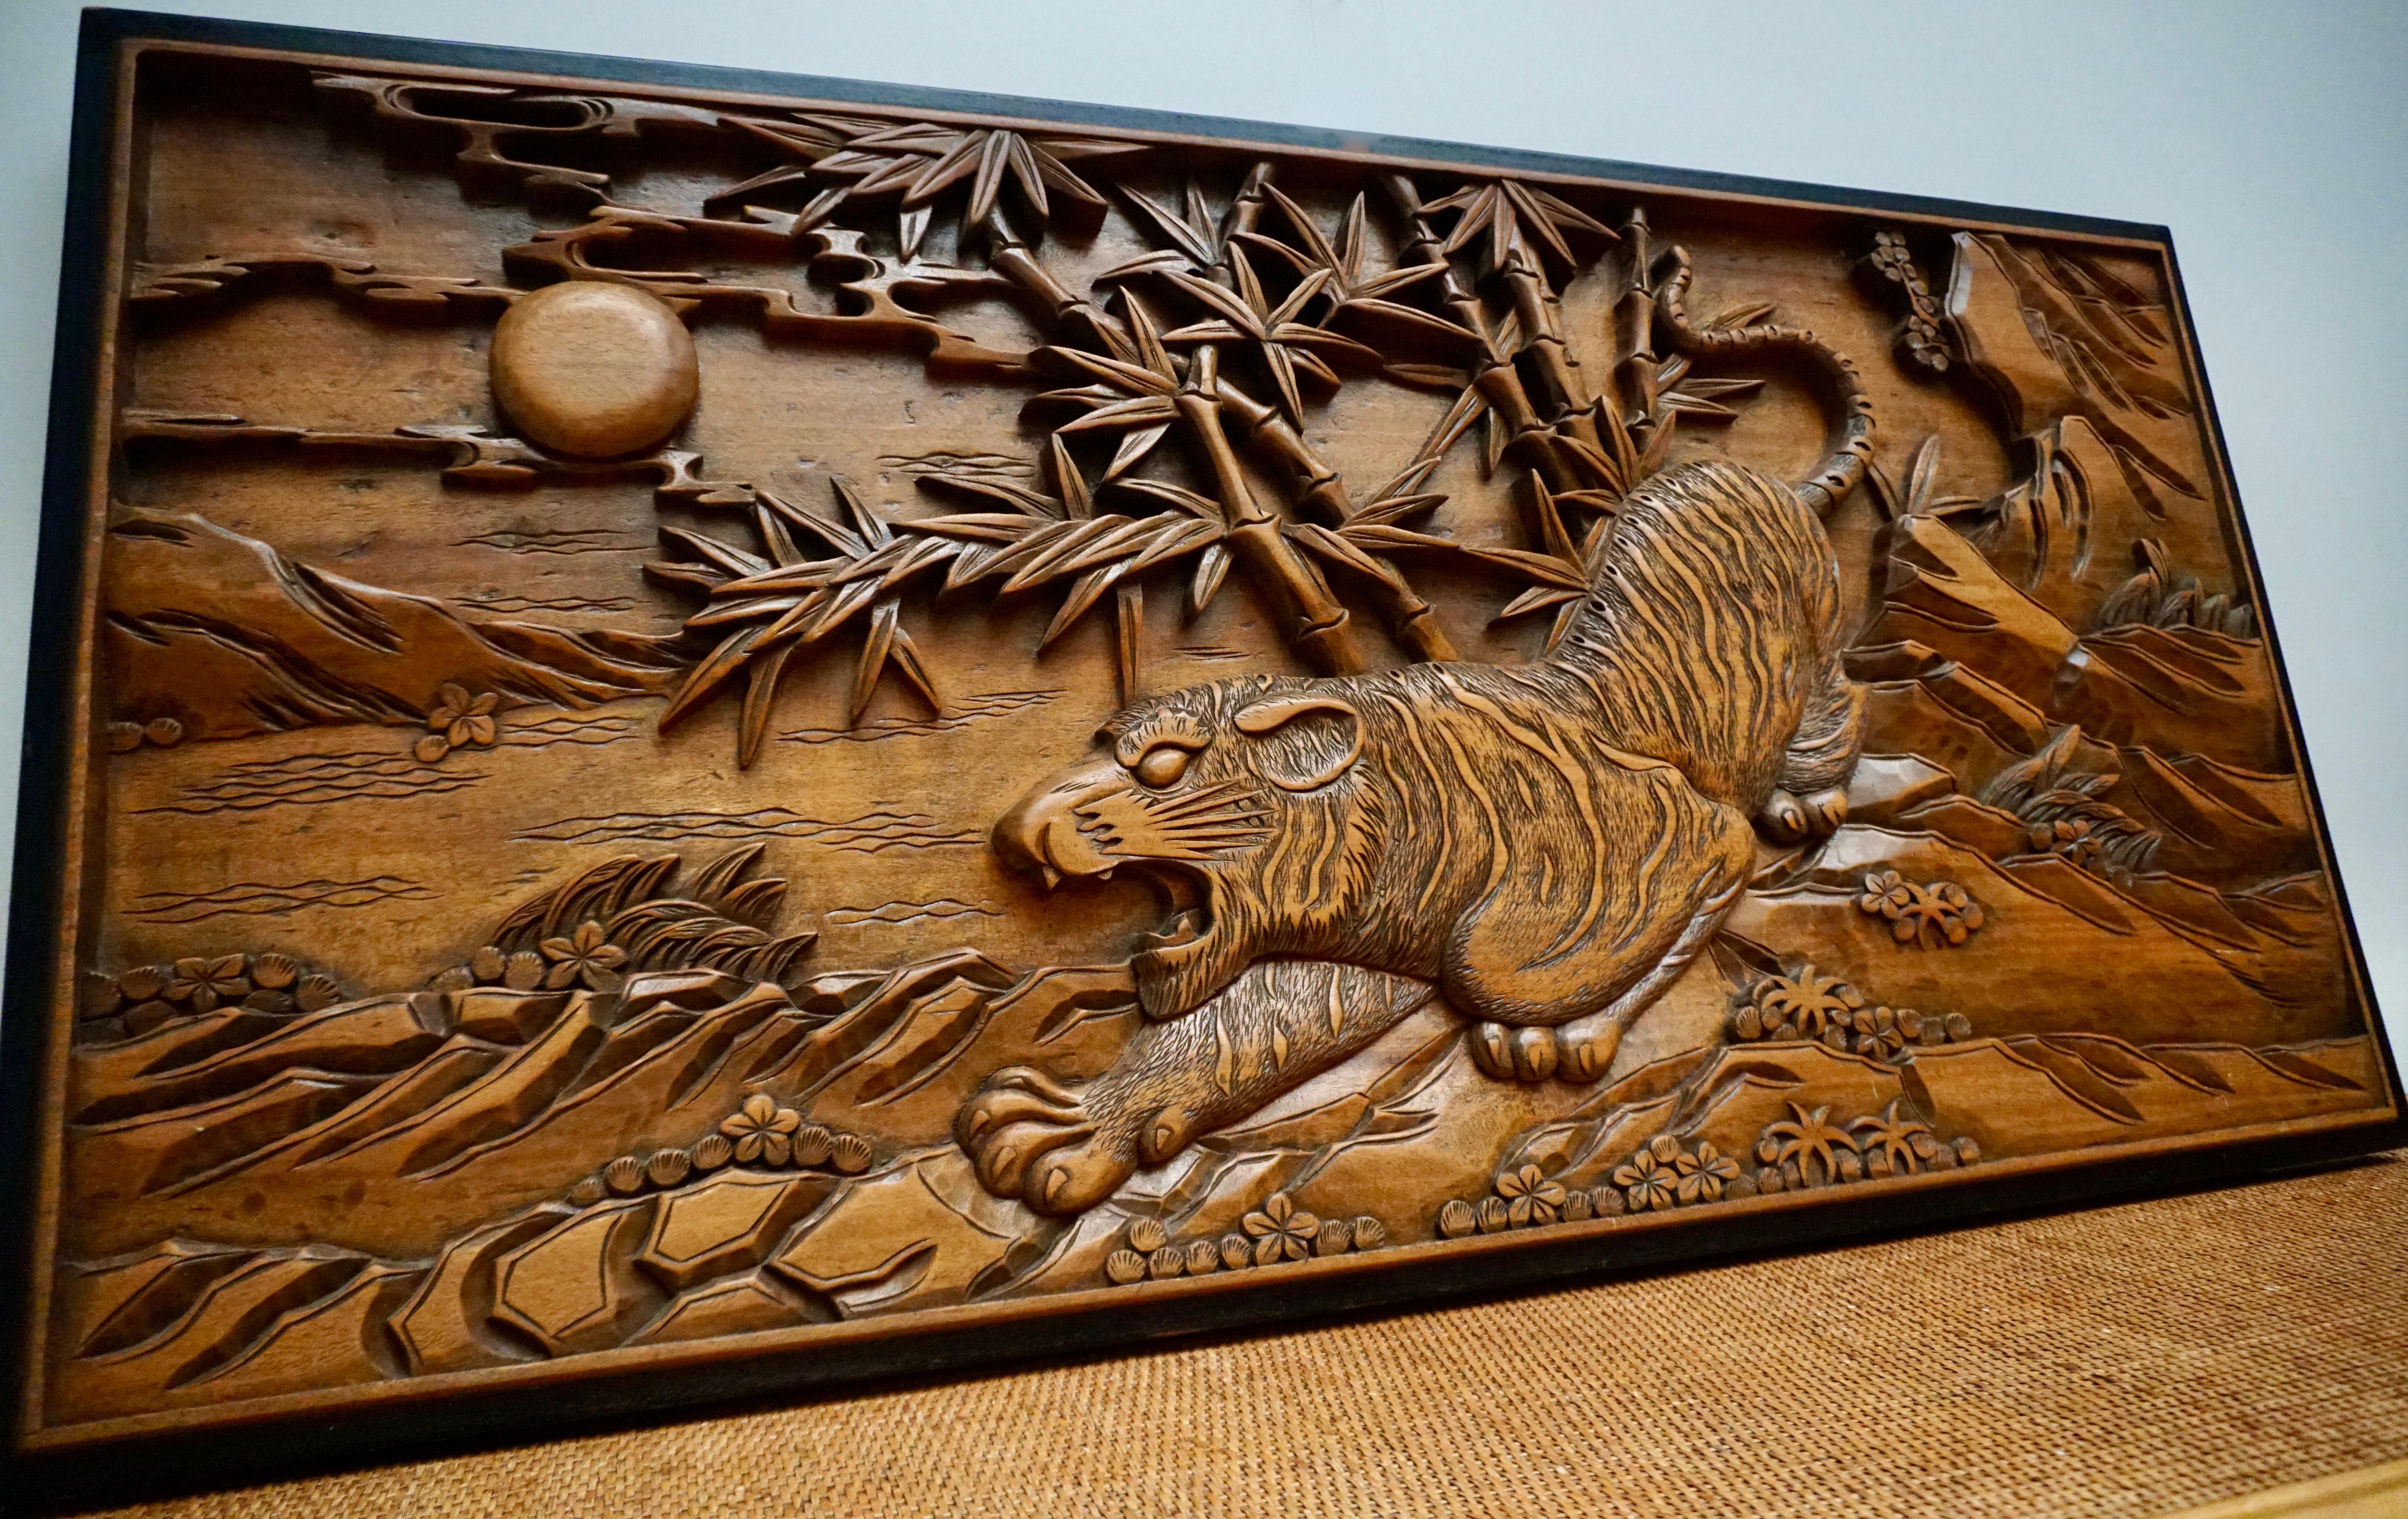 A large 19th century Chinese carved wall plaque in wood features a hunting tiger on rocks with bamboo trees and the sun in the background.
This 20th century Chinese hand carved wooden wall plaque would bring an exotic charm to any home and would